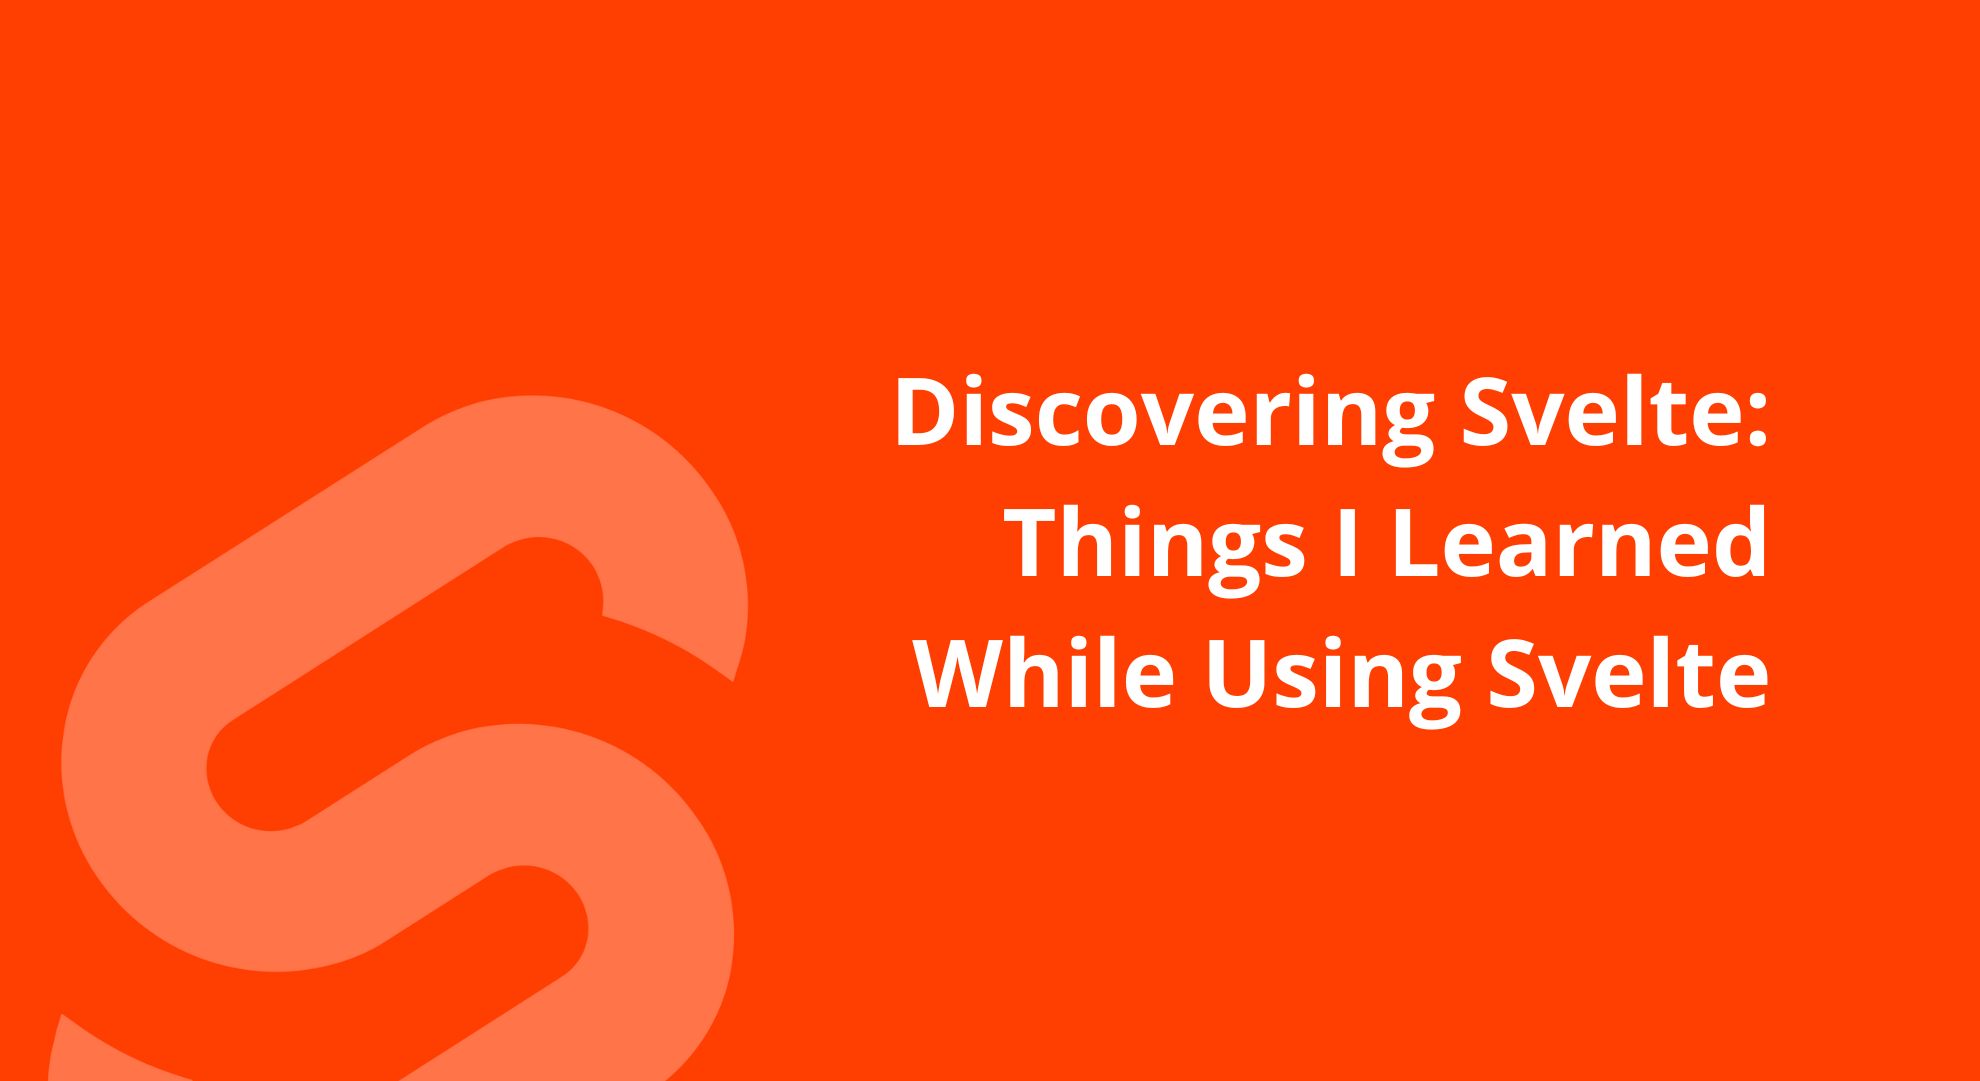 Discovering Svelte: Things I Learned While Using Svelte